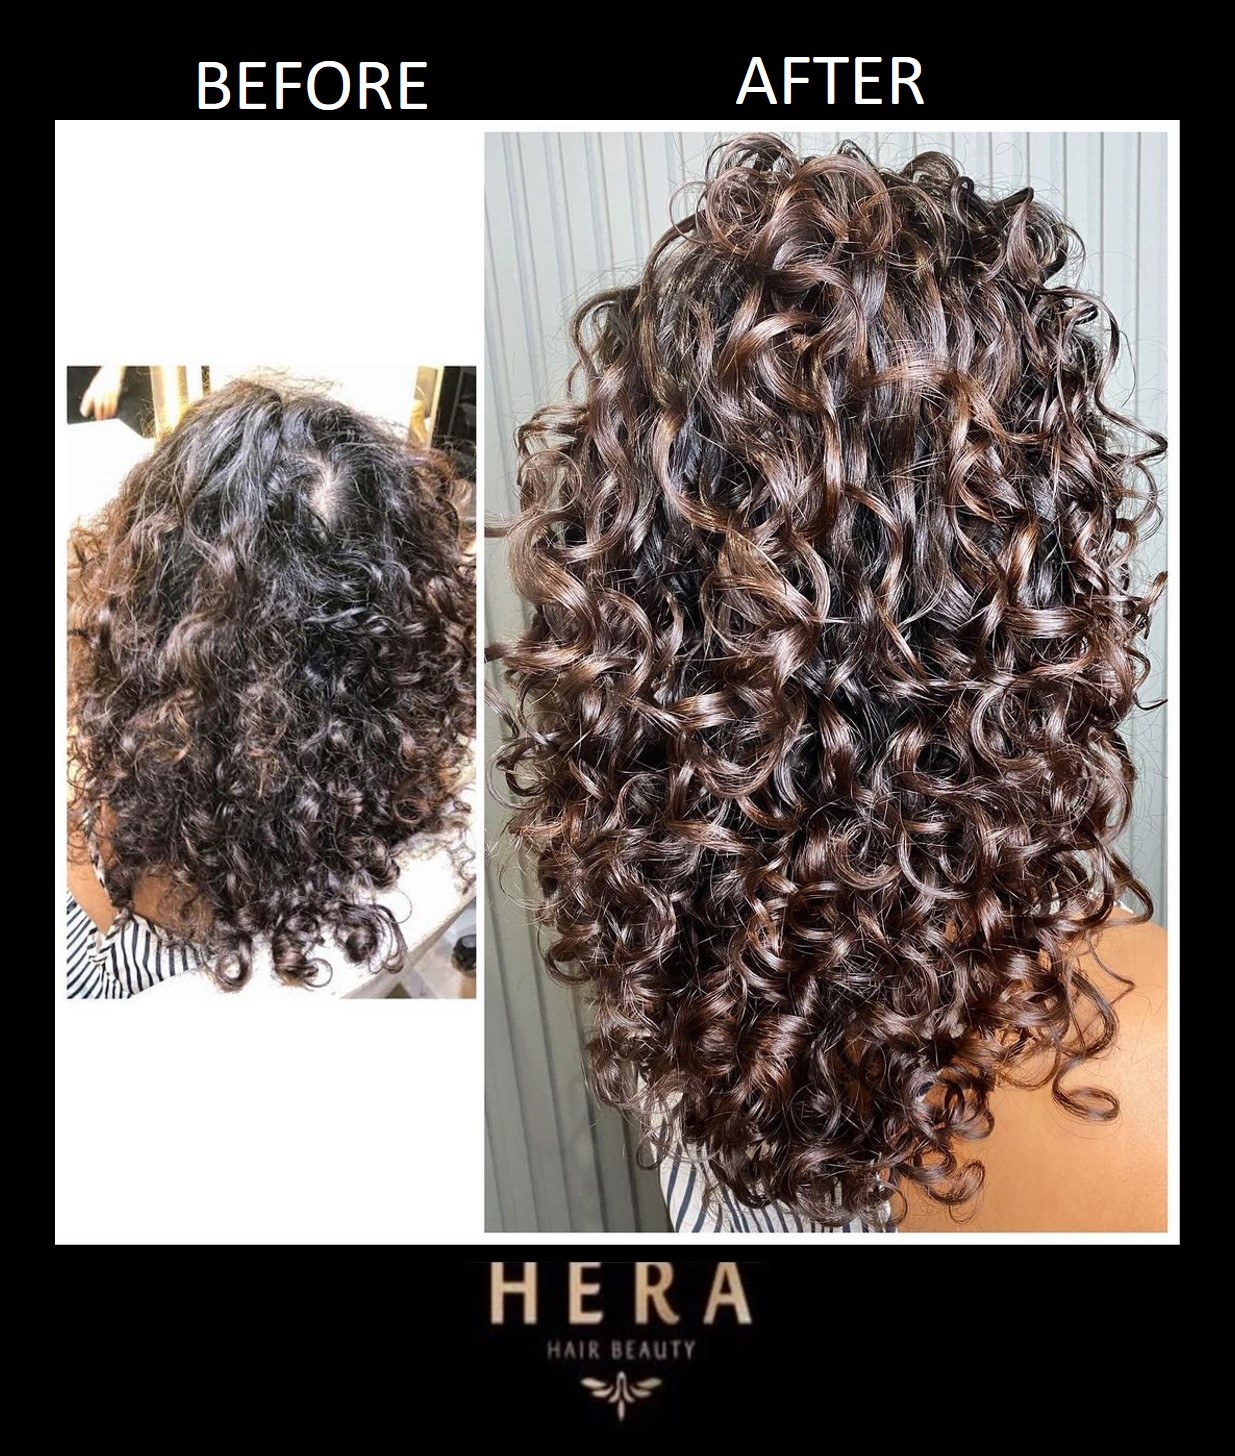 How To Determine If Your Curly Hair Is Weighed Down or Limping? | Hera Hair  Beauty